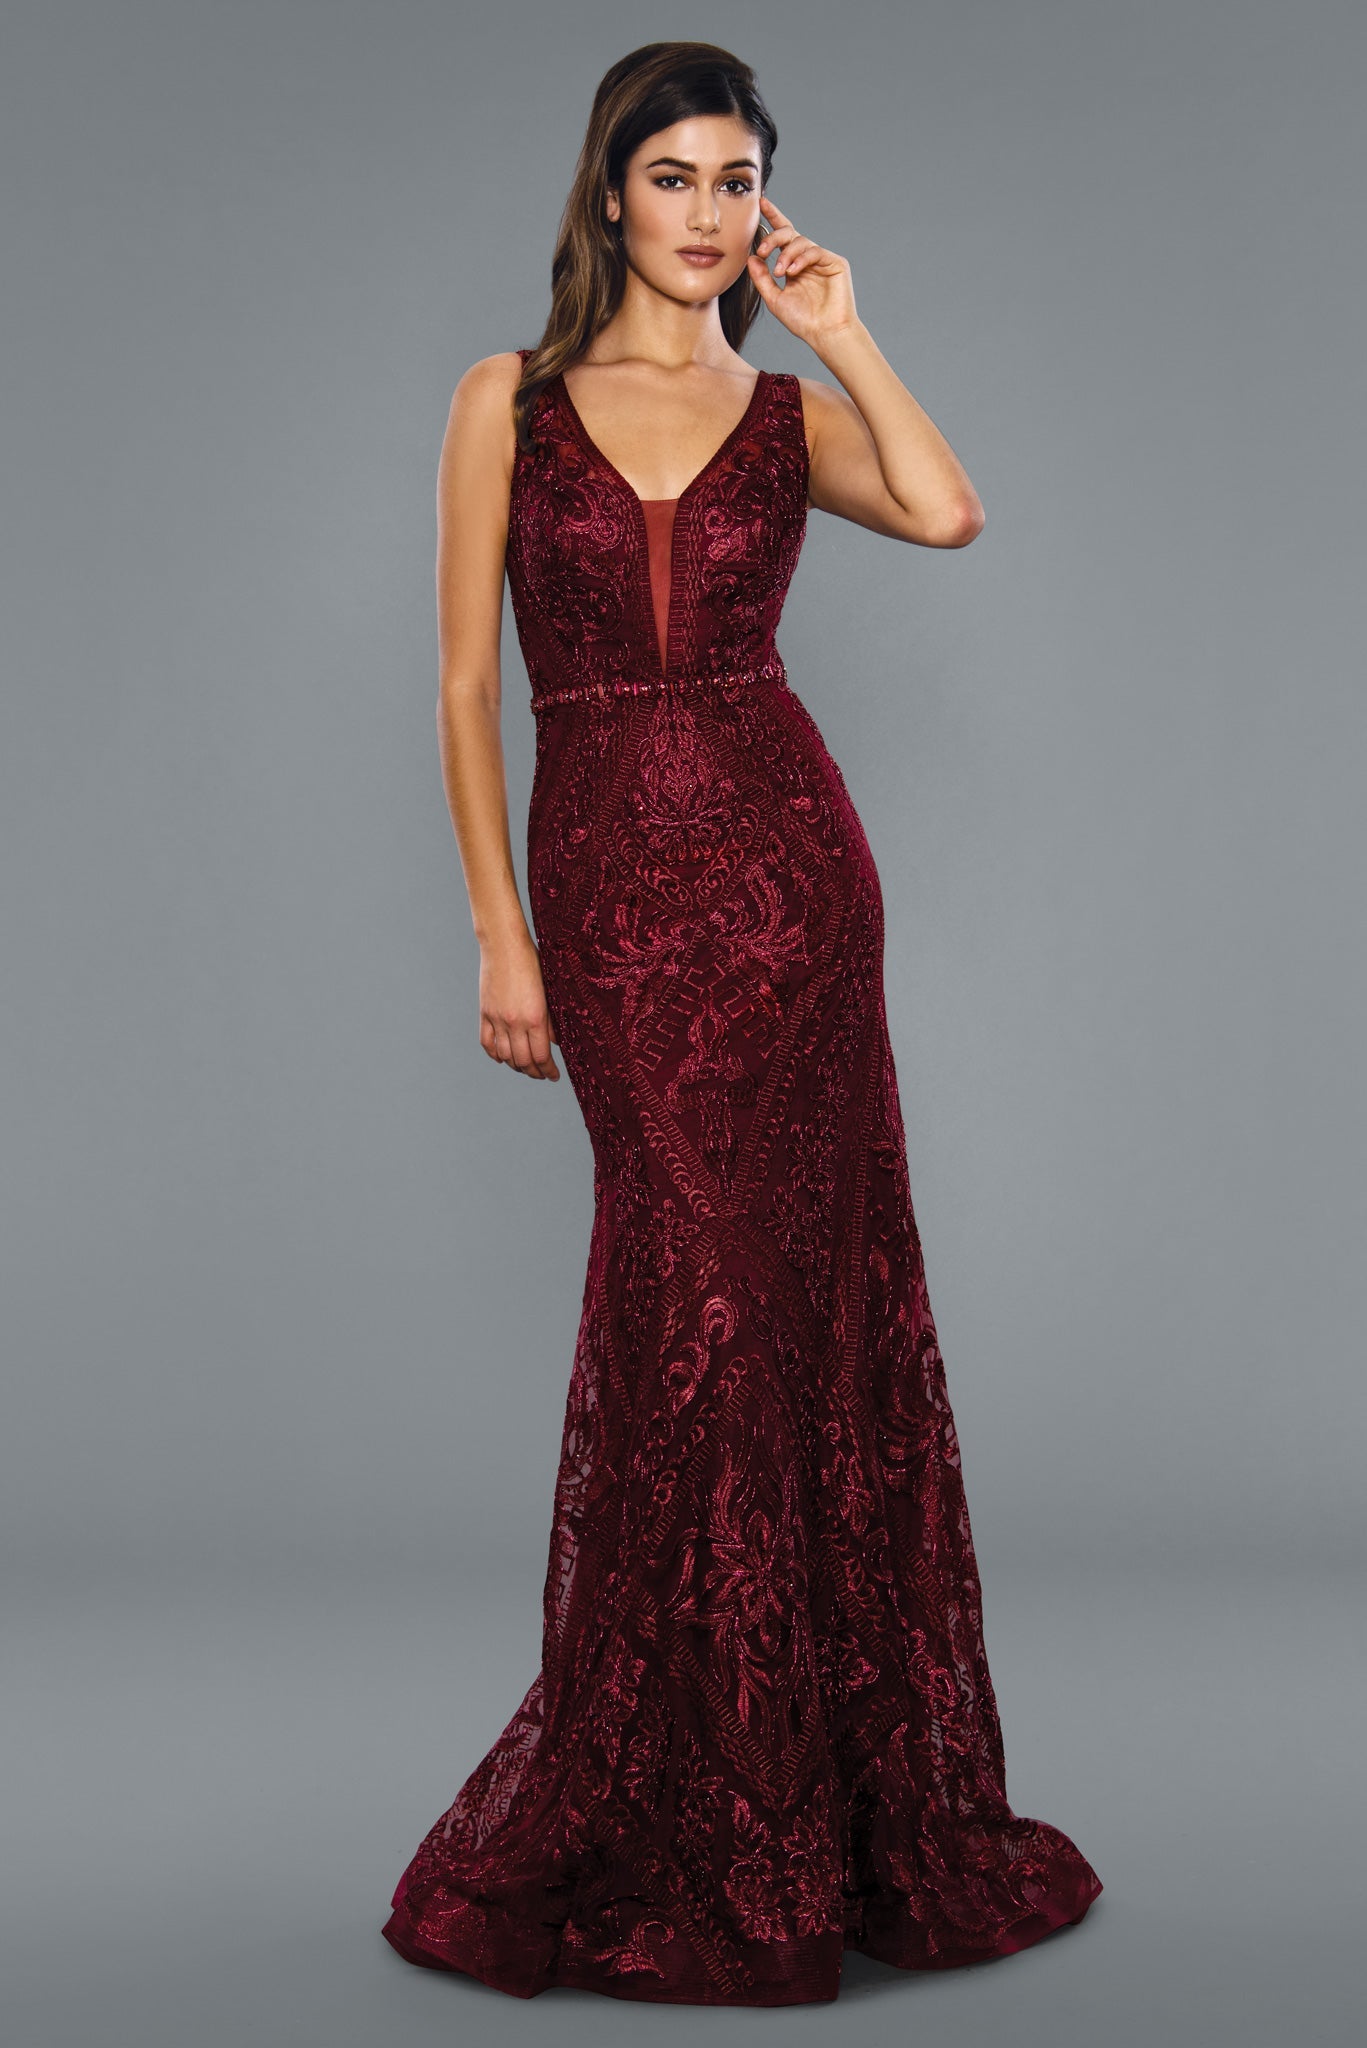 Stella Couture 20032 Long Fitted Shimmer Lace formal prom pageant dress evening gown  Available Sizes: 6-20  Available Colors: Charcoal, Dusty Pink, Navy, Wine